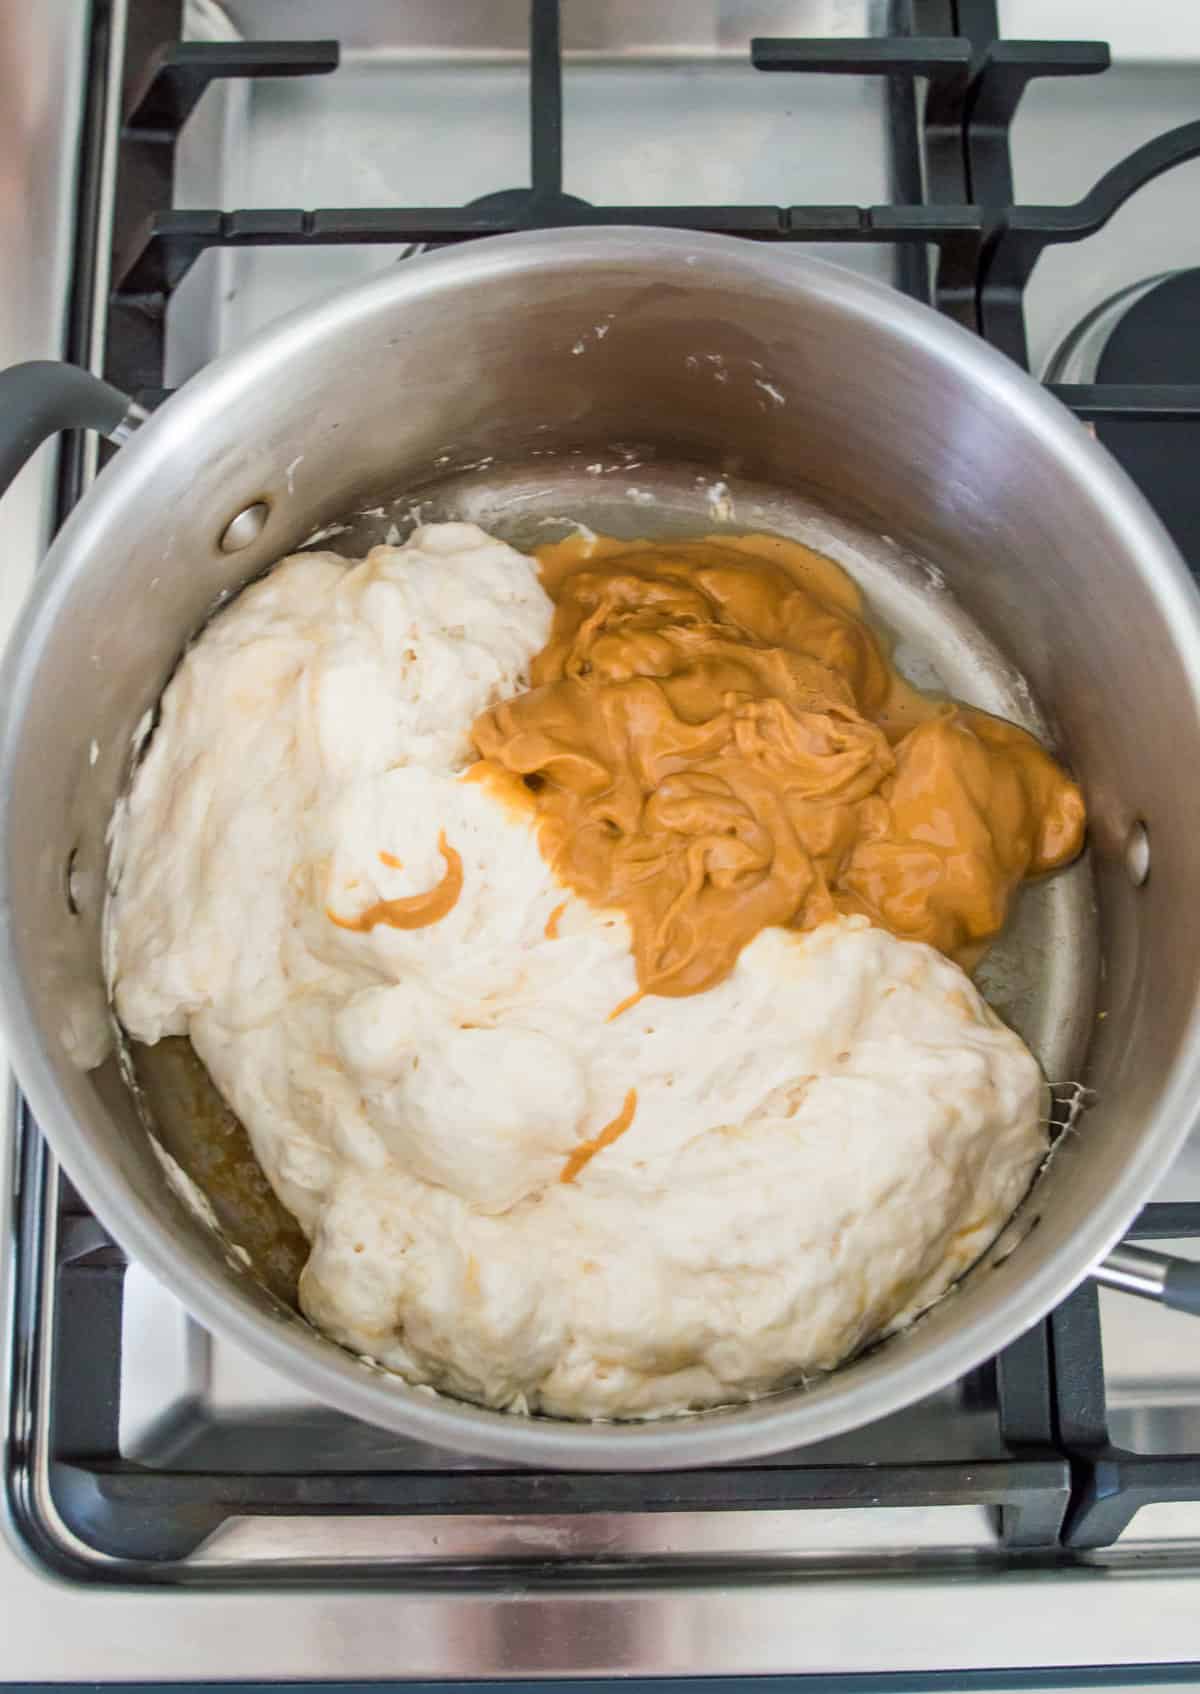 A large pot on the stovetop with melted marshmallows and smooth peanut butter in it.